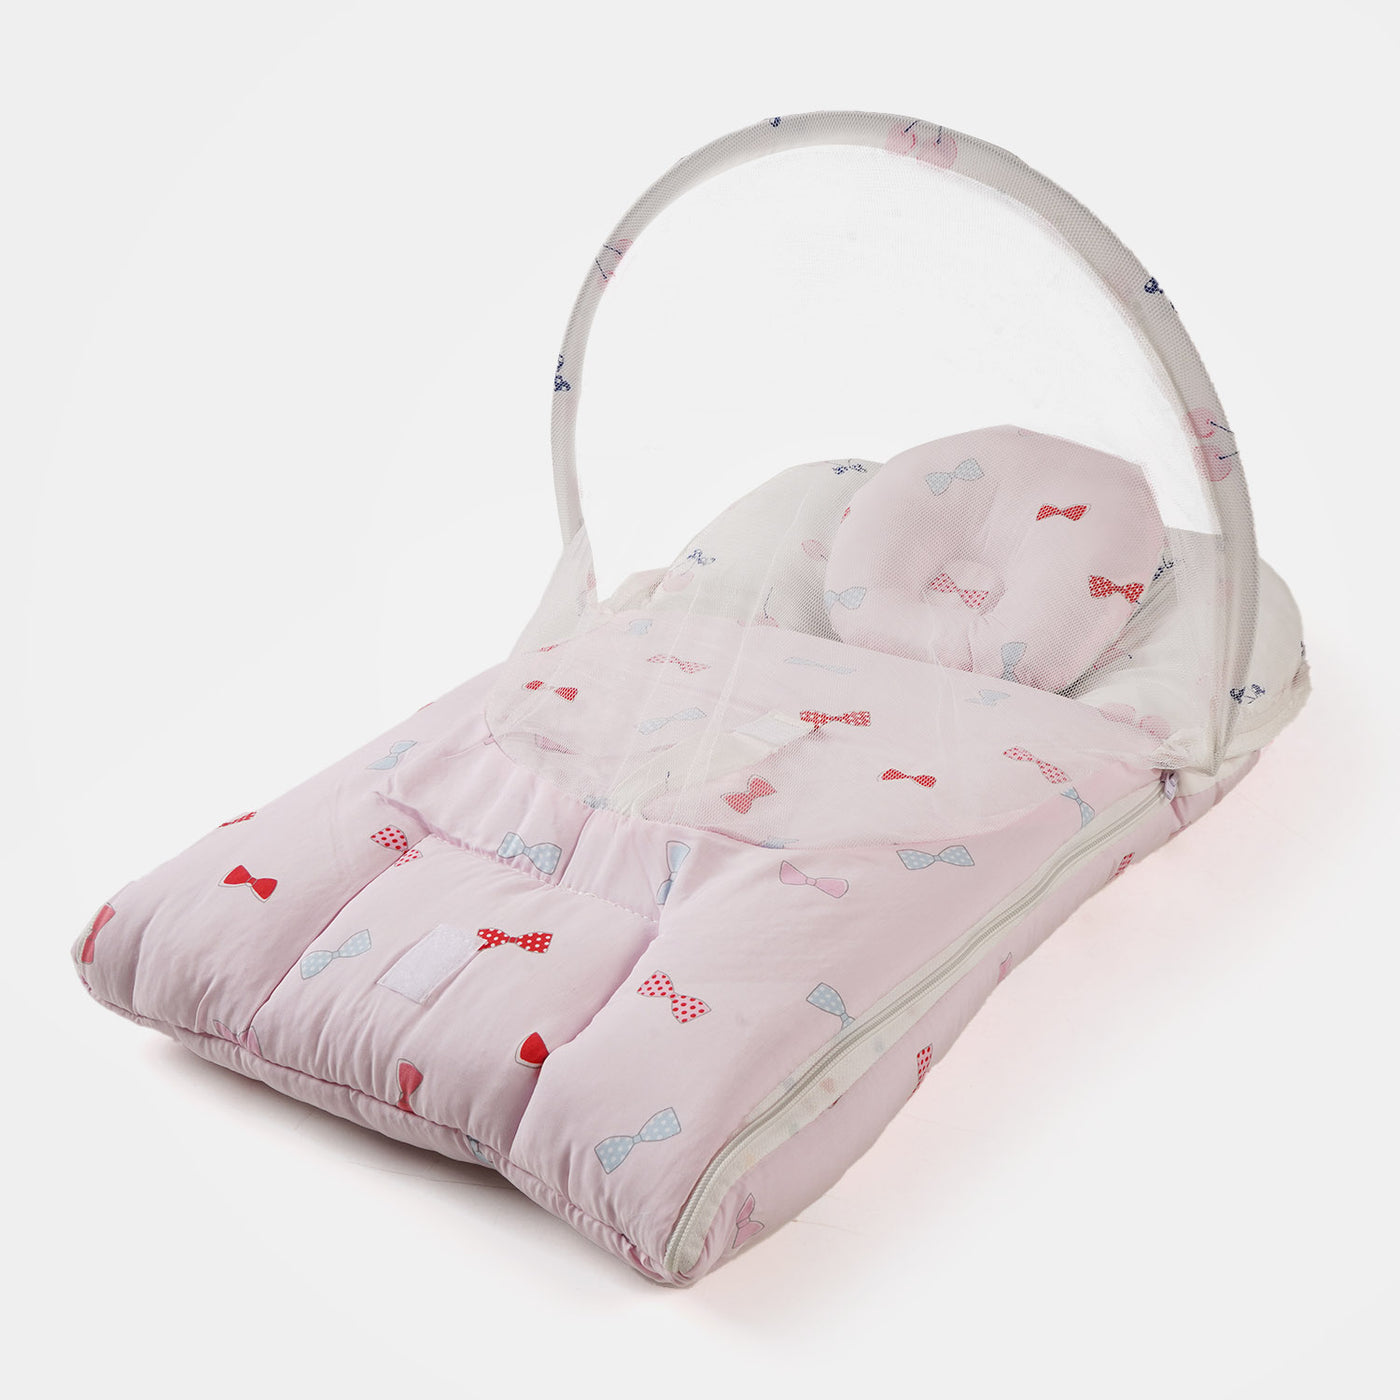 Baby Carry Nest "2PCs" With Mosquito Net